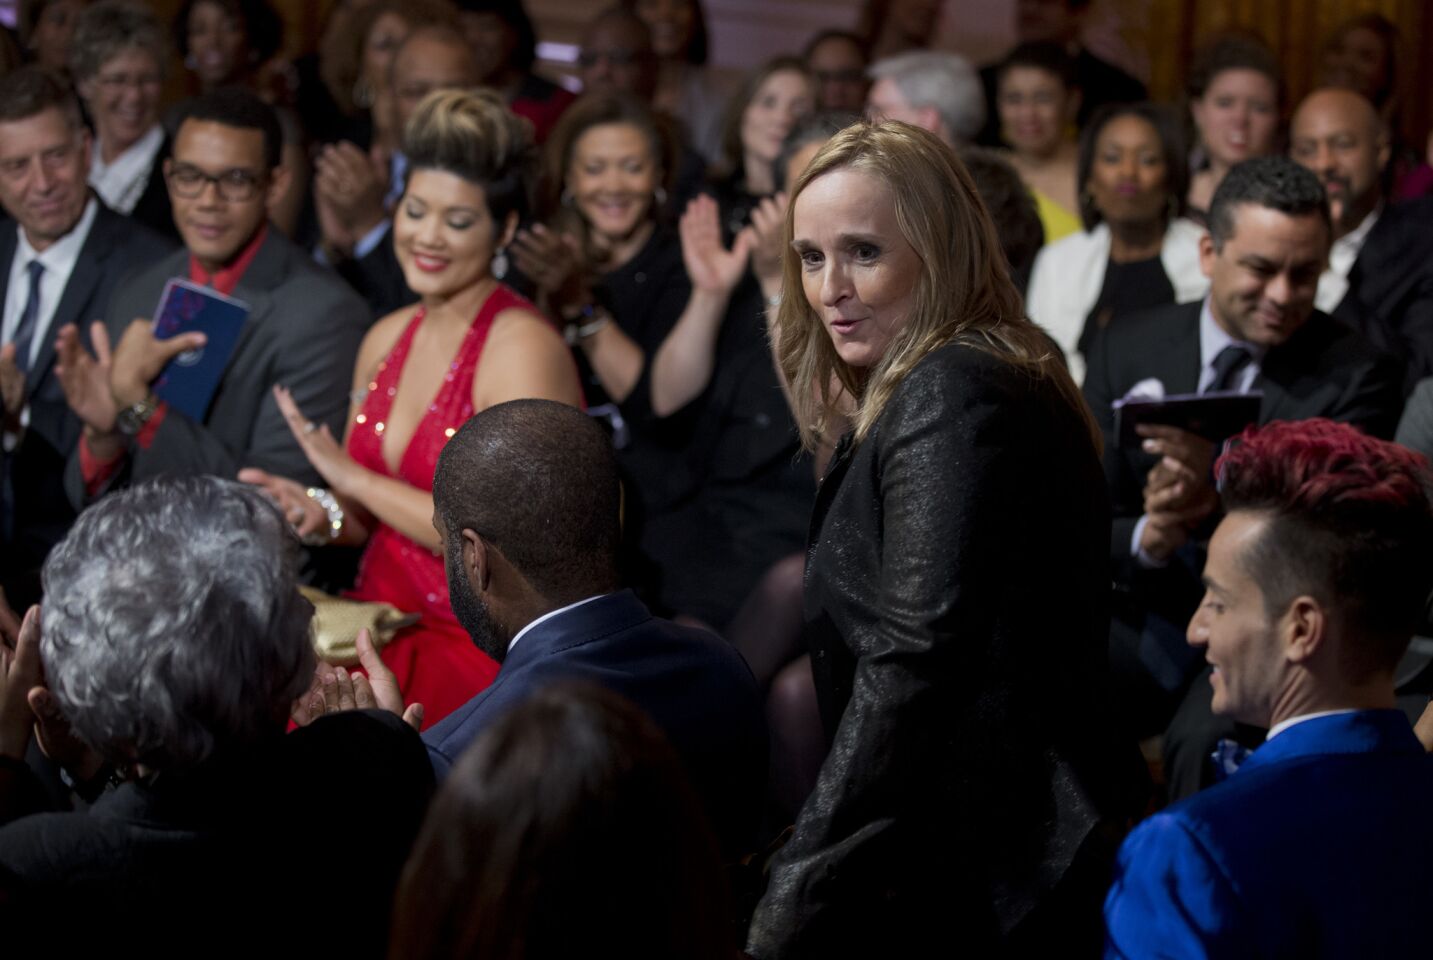 Musician Melissa Etheridge announced she was a lesbian during the January 1993 Triangle Ball — a gay and lesbian gala that celebrated the first inauguration of President Clinton.